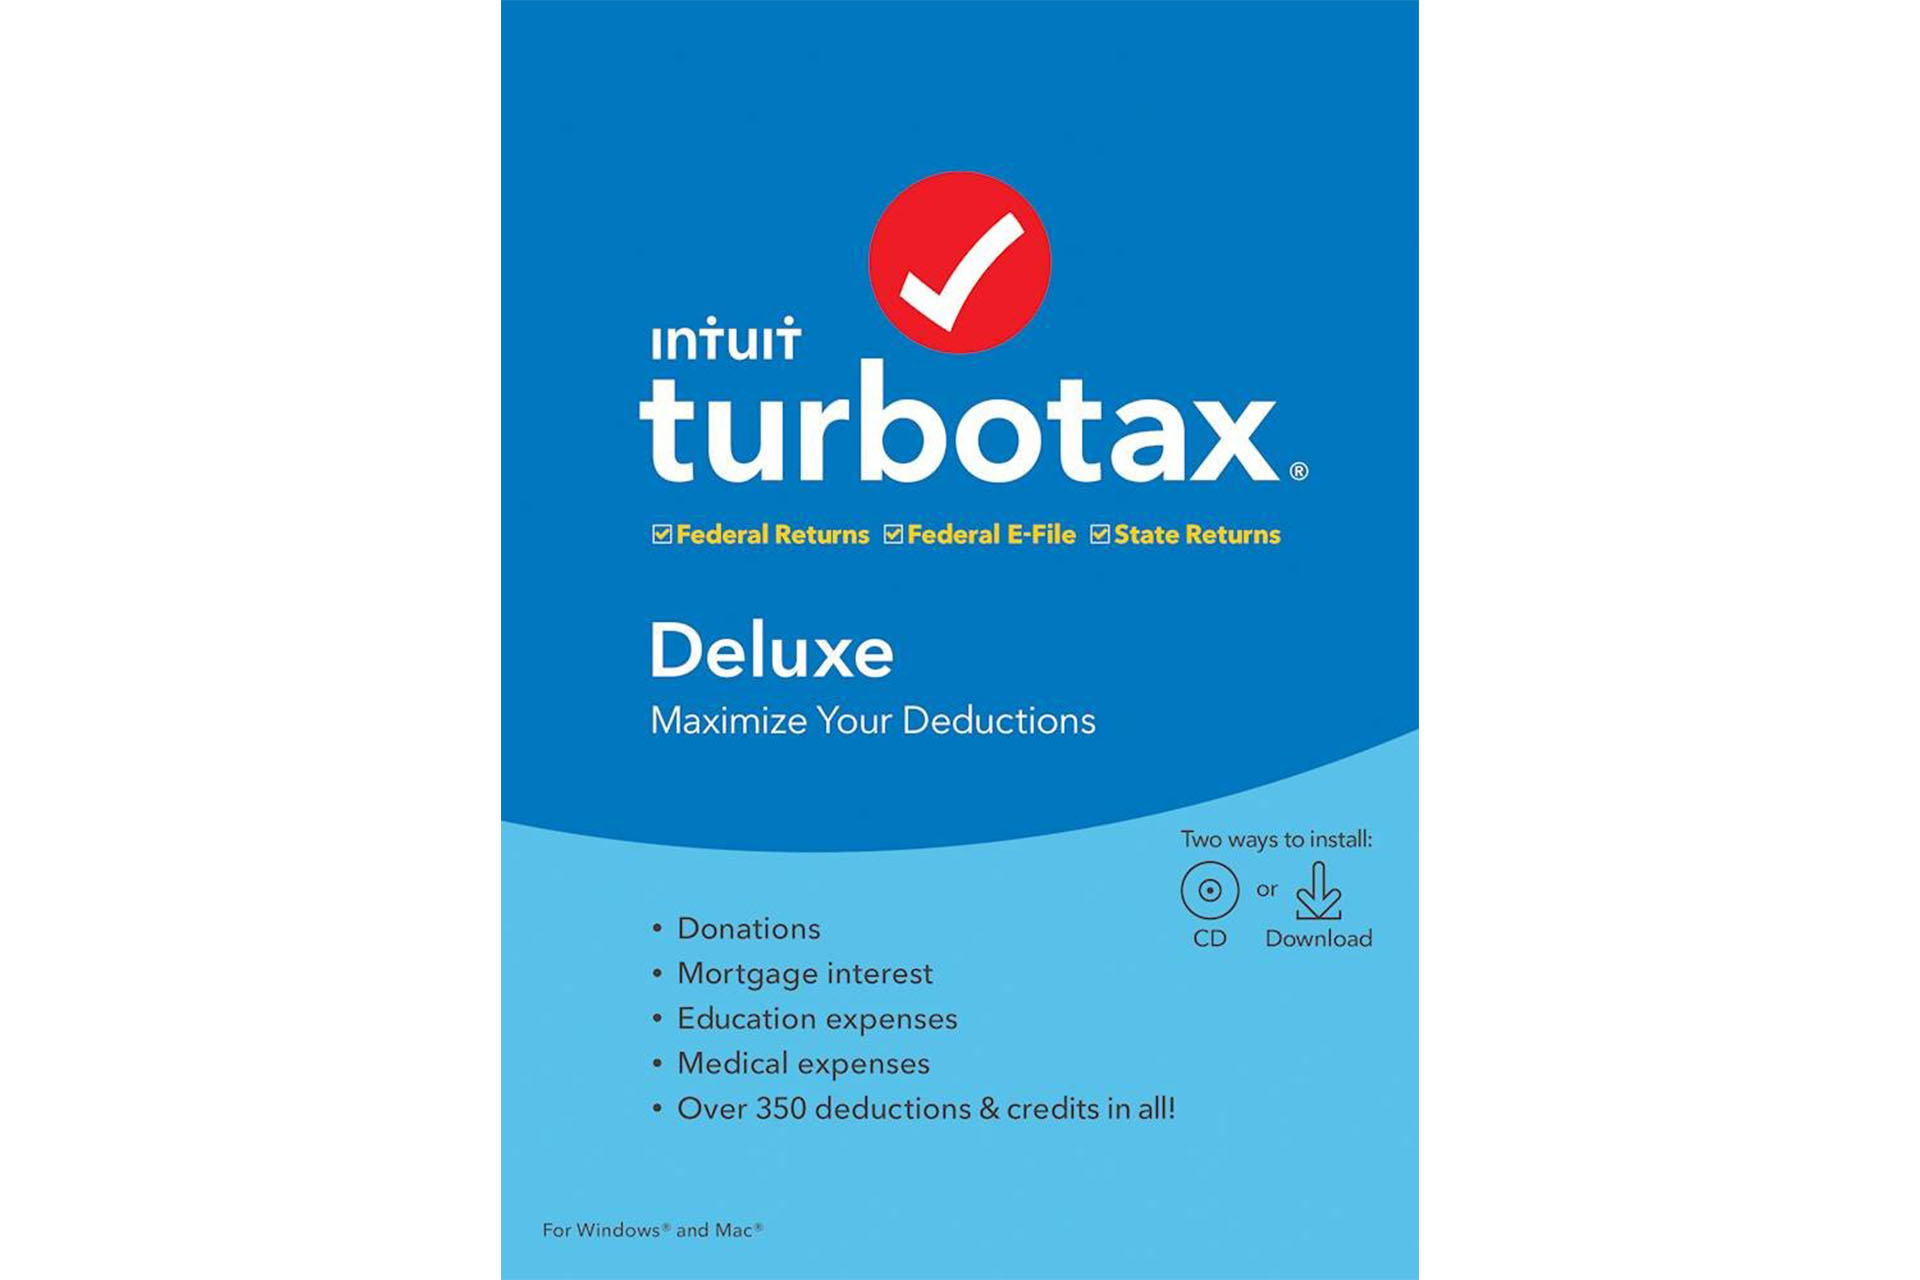 Best Buy Cuts Prices On TurboTax Software For Today Only Digital Trends